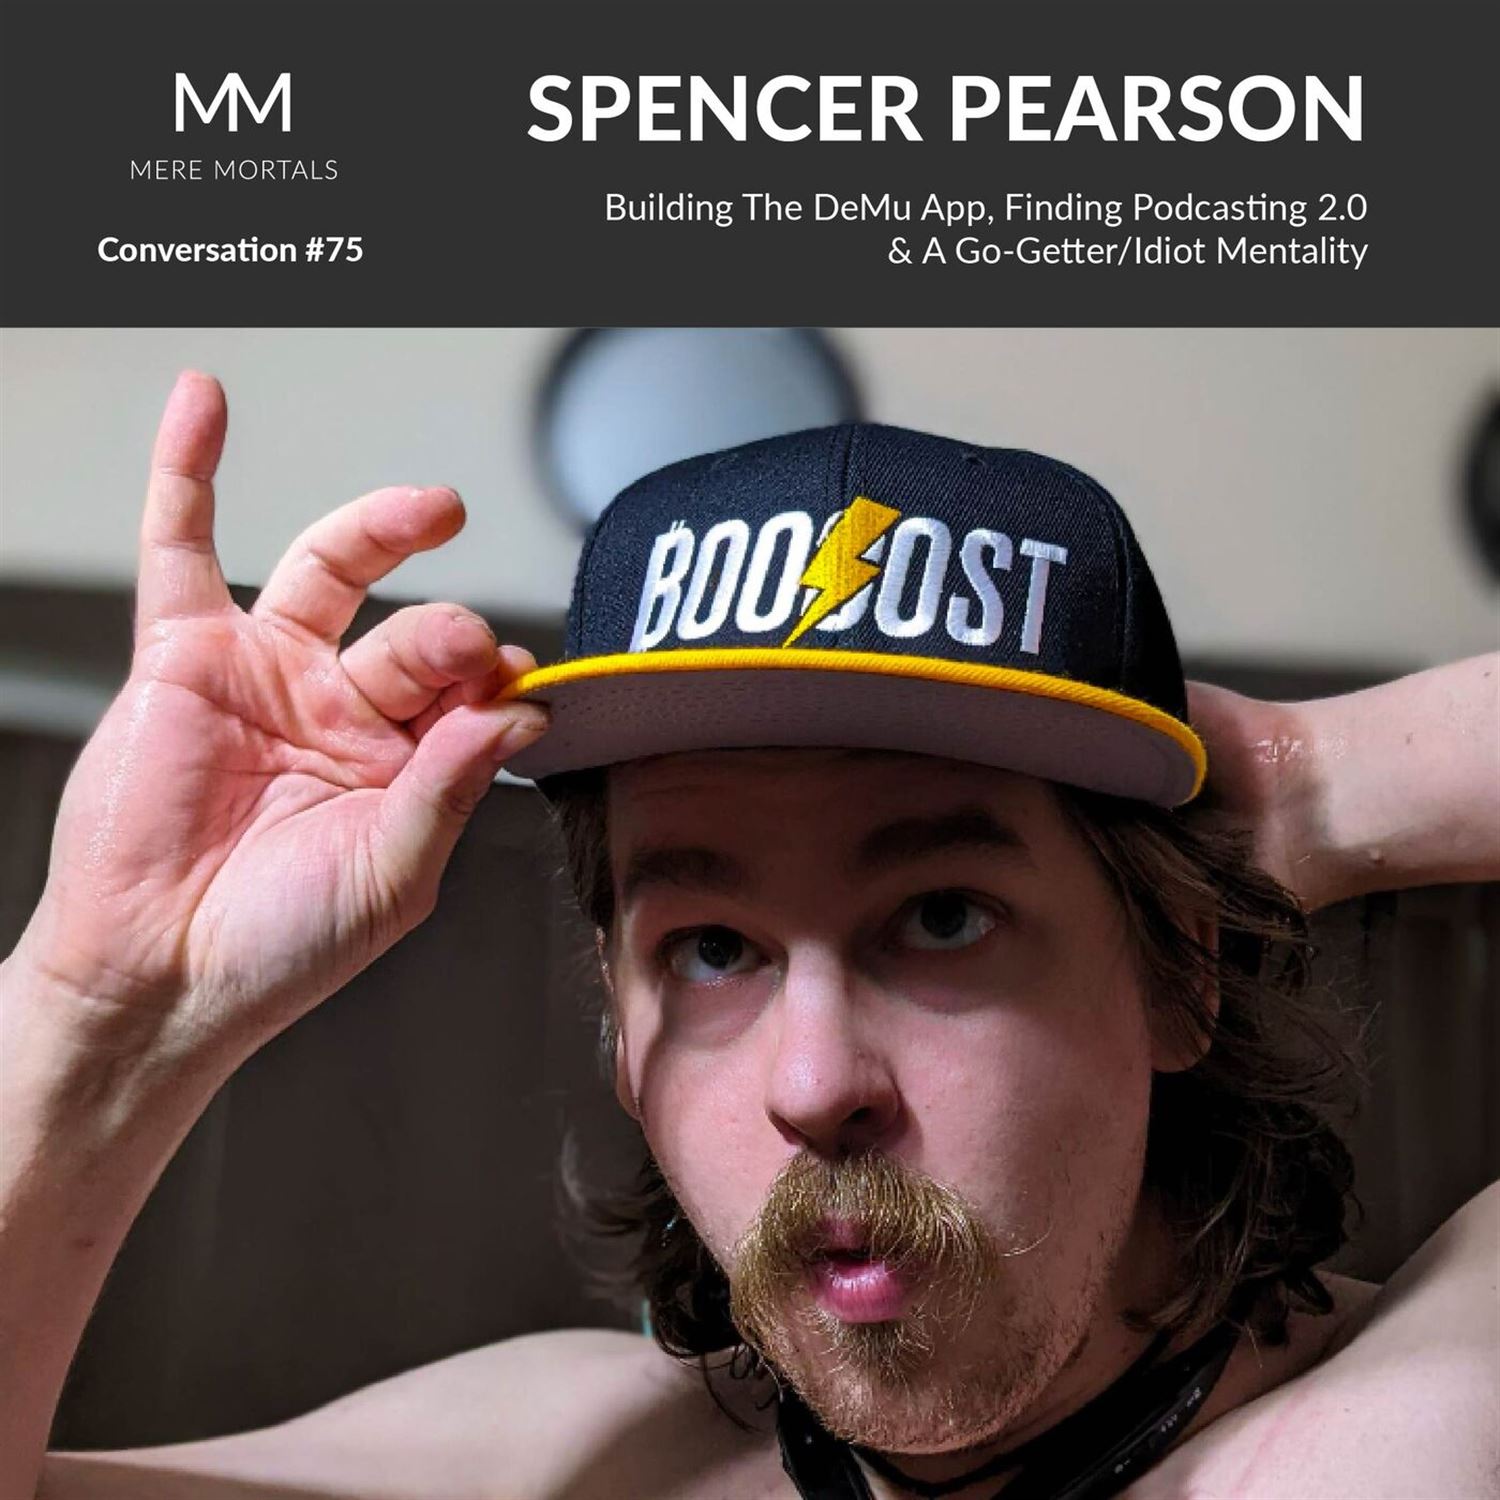 SPENCER PEARSON | Building The DeMu App, Finding Podcasting 2.0 & A Go-Getter/Idiot Mentality